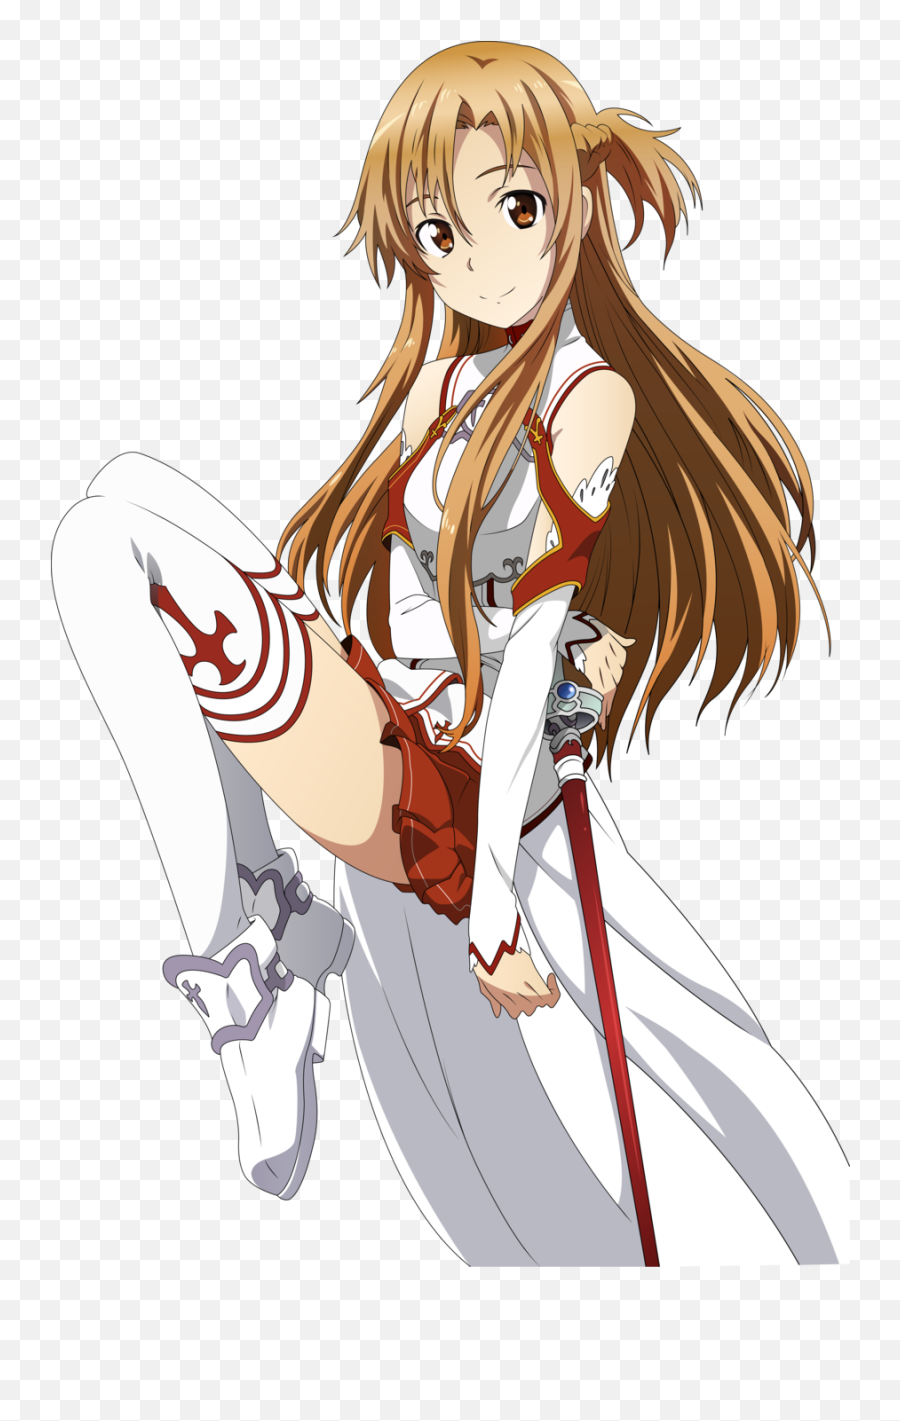 The Most Beautiful Female Anime - Asuna Yuuki Png,Anime Character Png